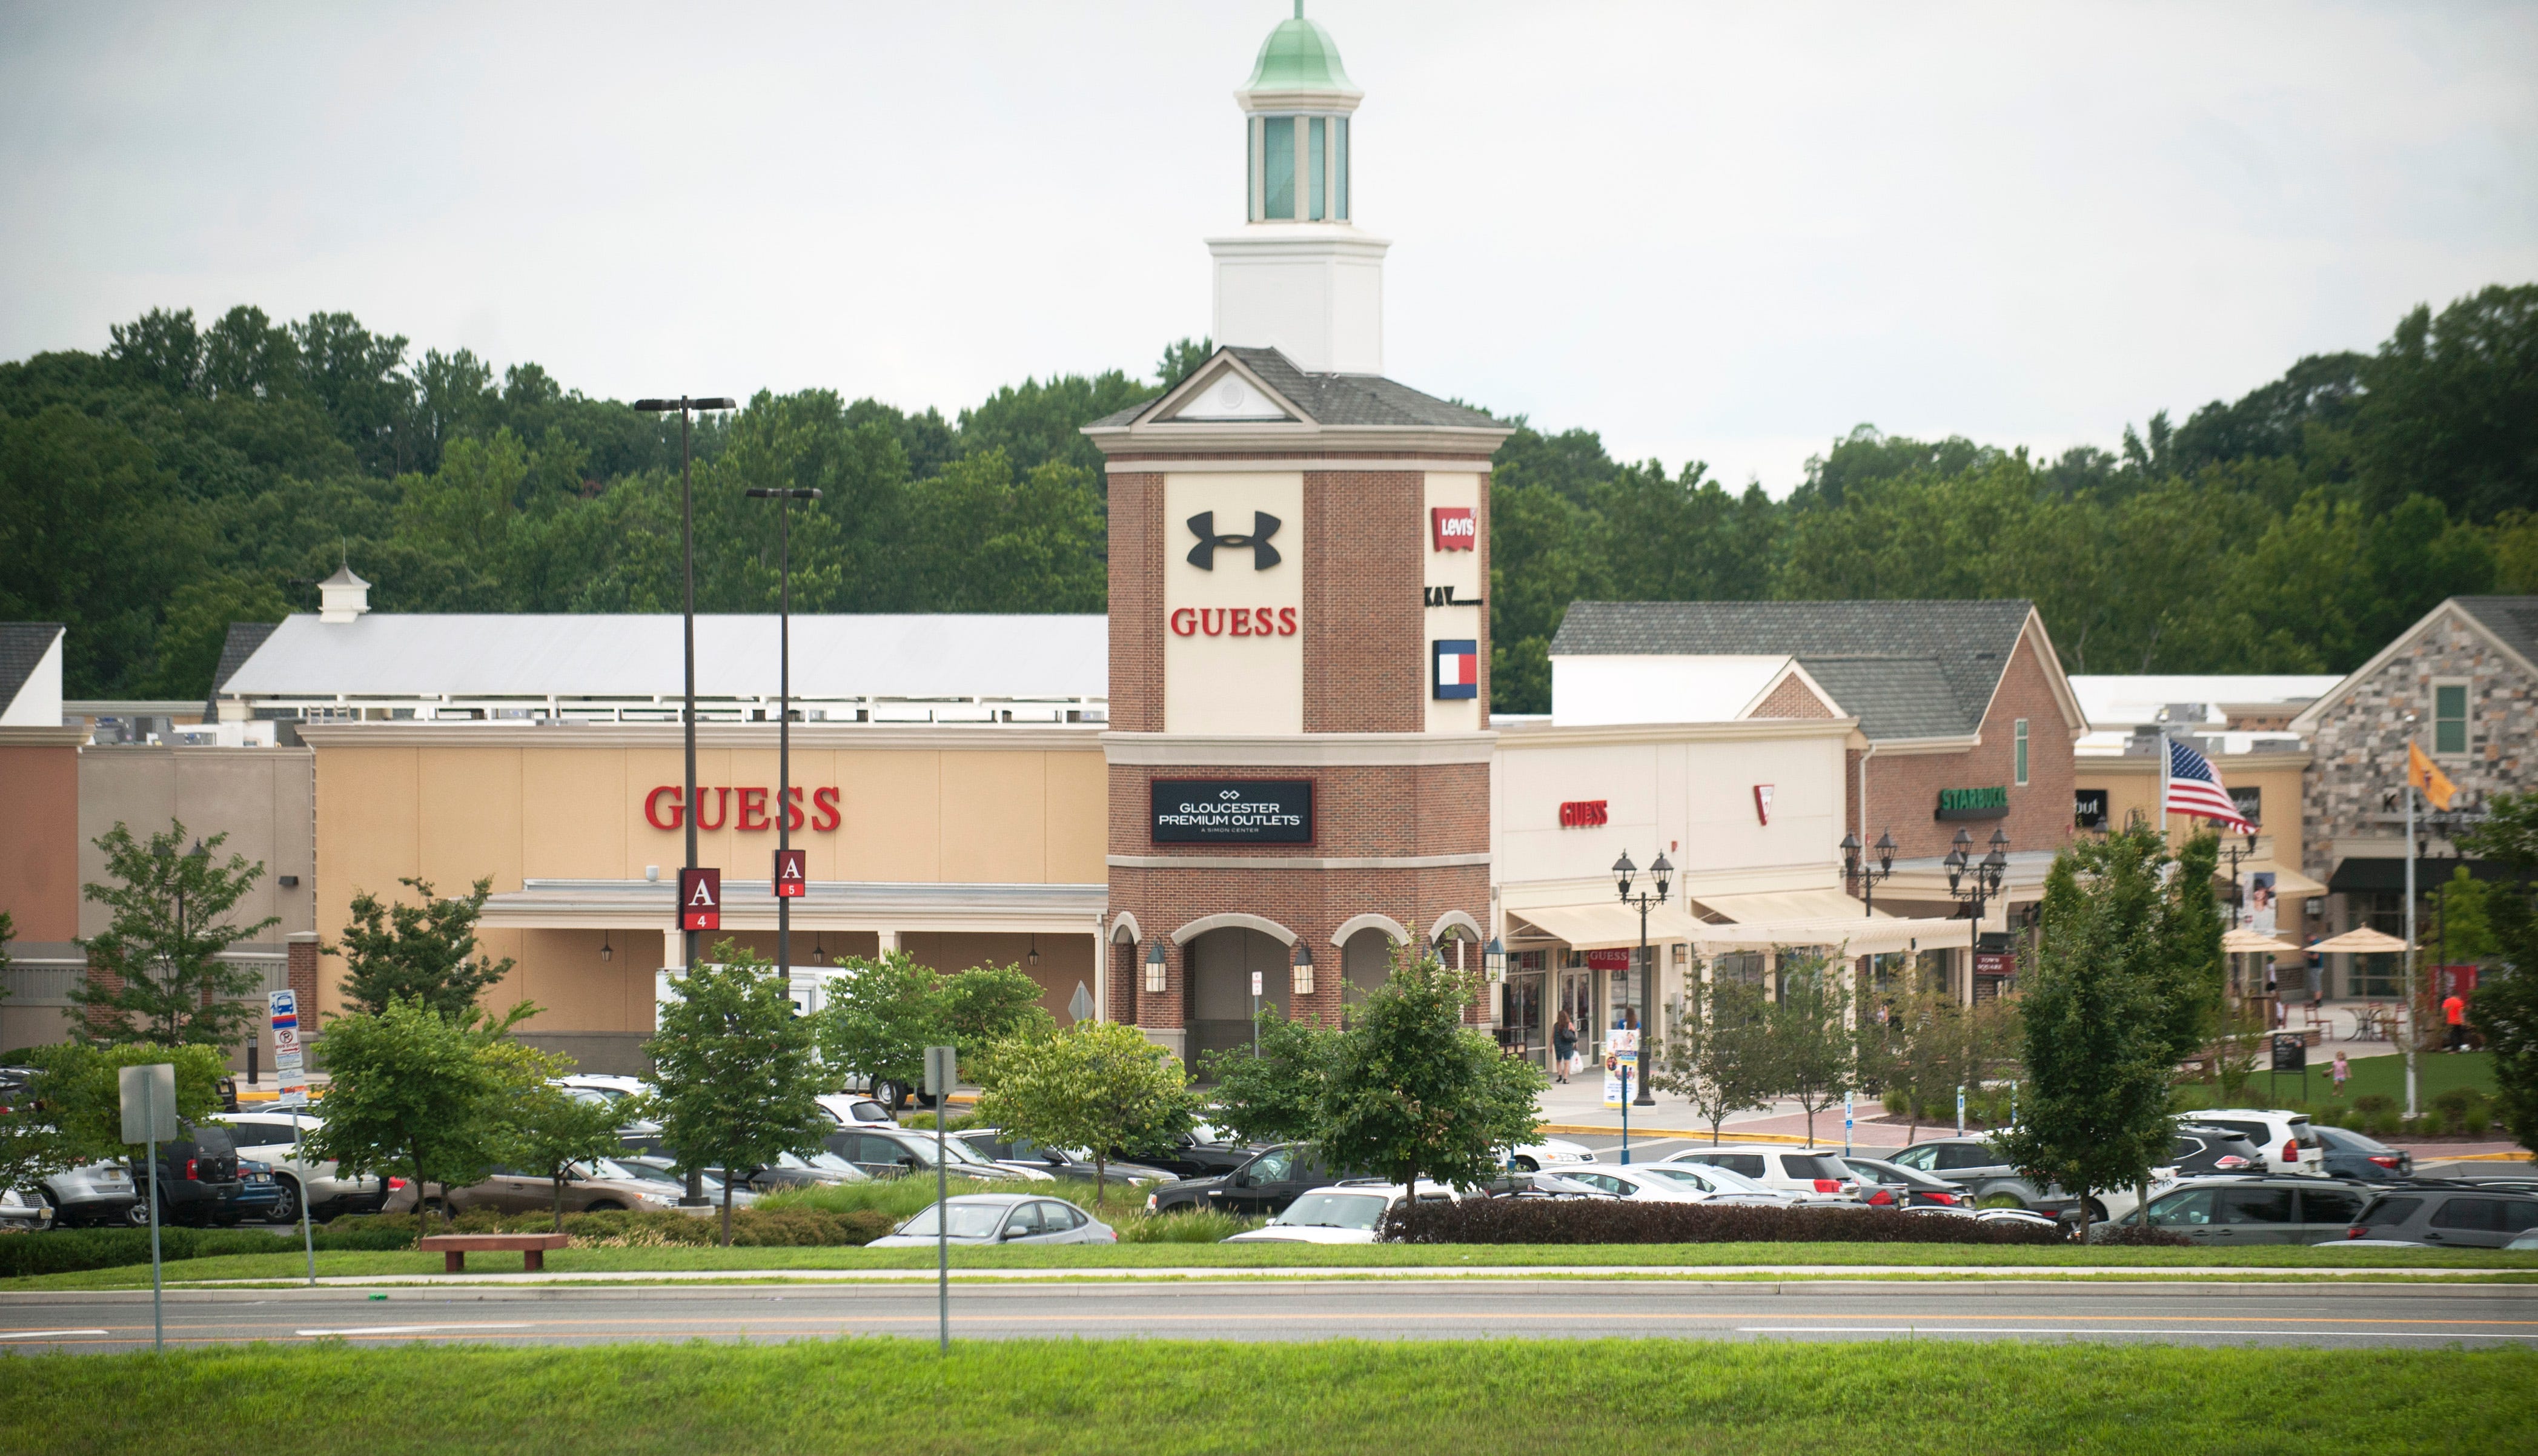 gloucester premium outlets new jersey